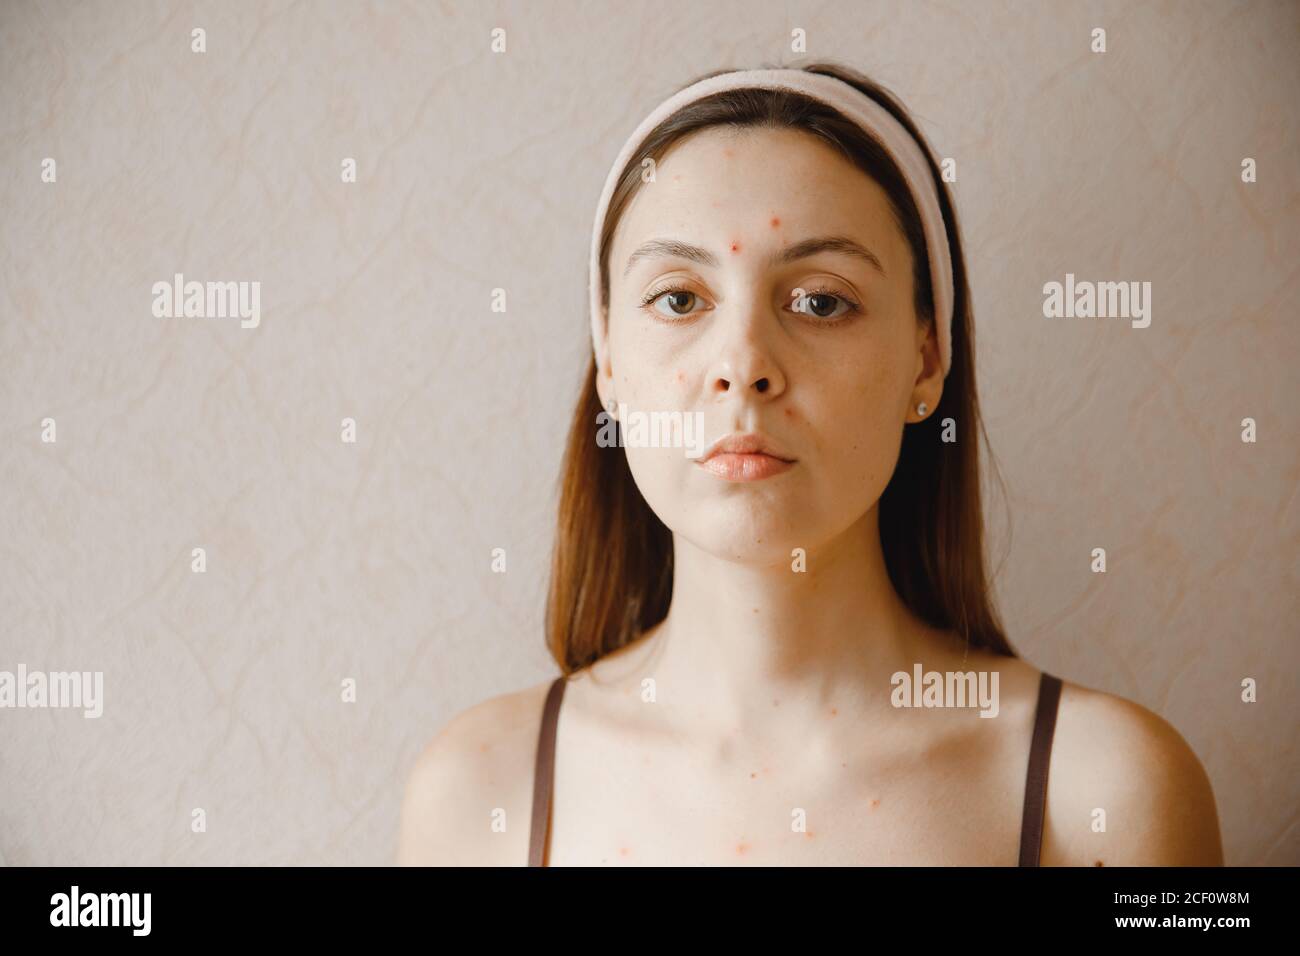 Skin young woman is affected by chickenpox acne defects Stock Photo